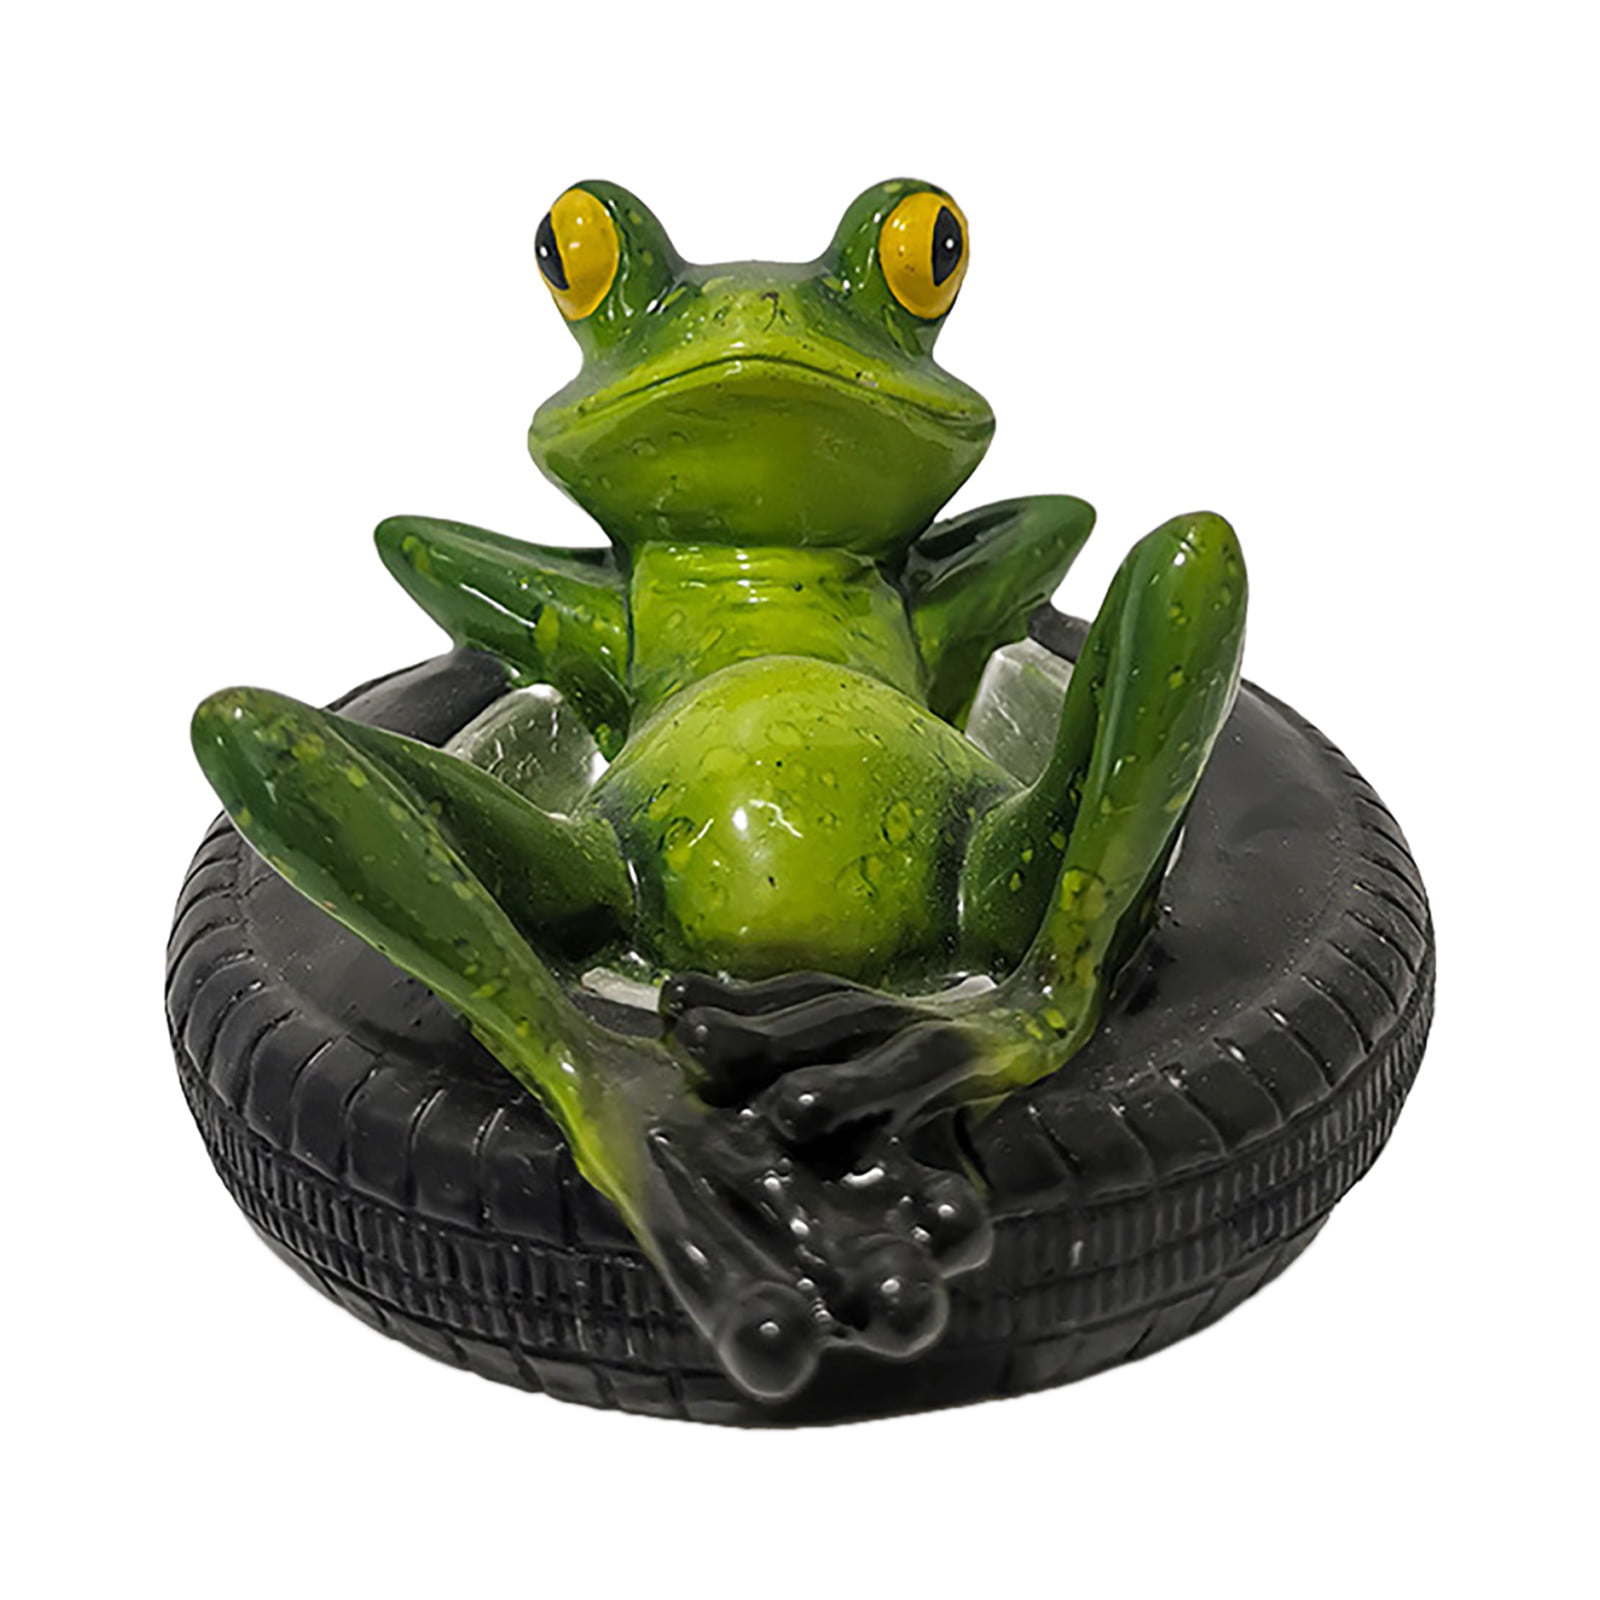 Floating Frogs Statue Creative Outdoor Garden Pond Decorative Fish Tank Pool New